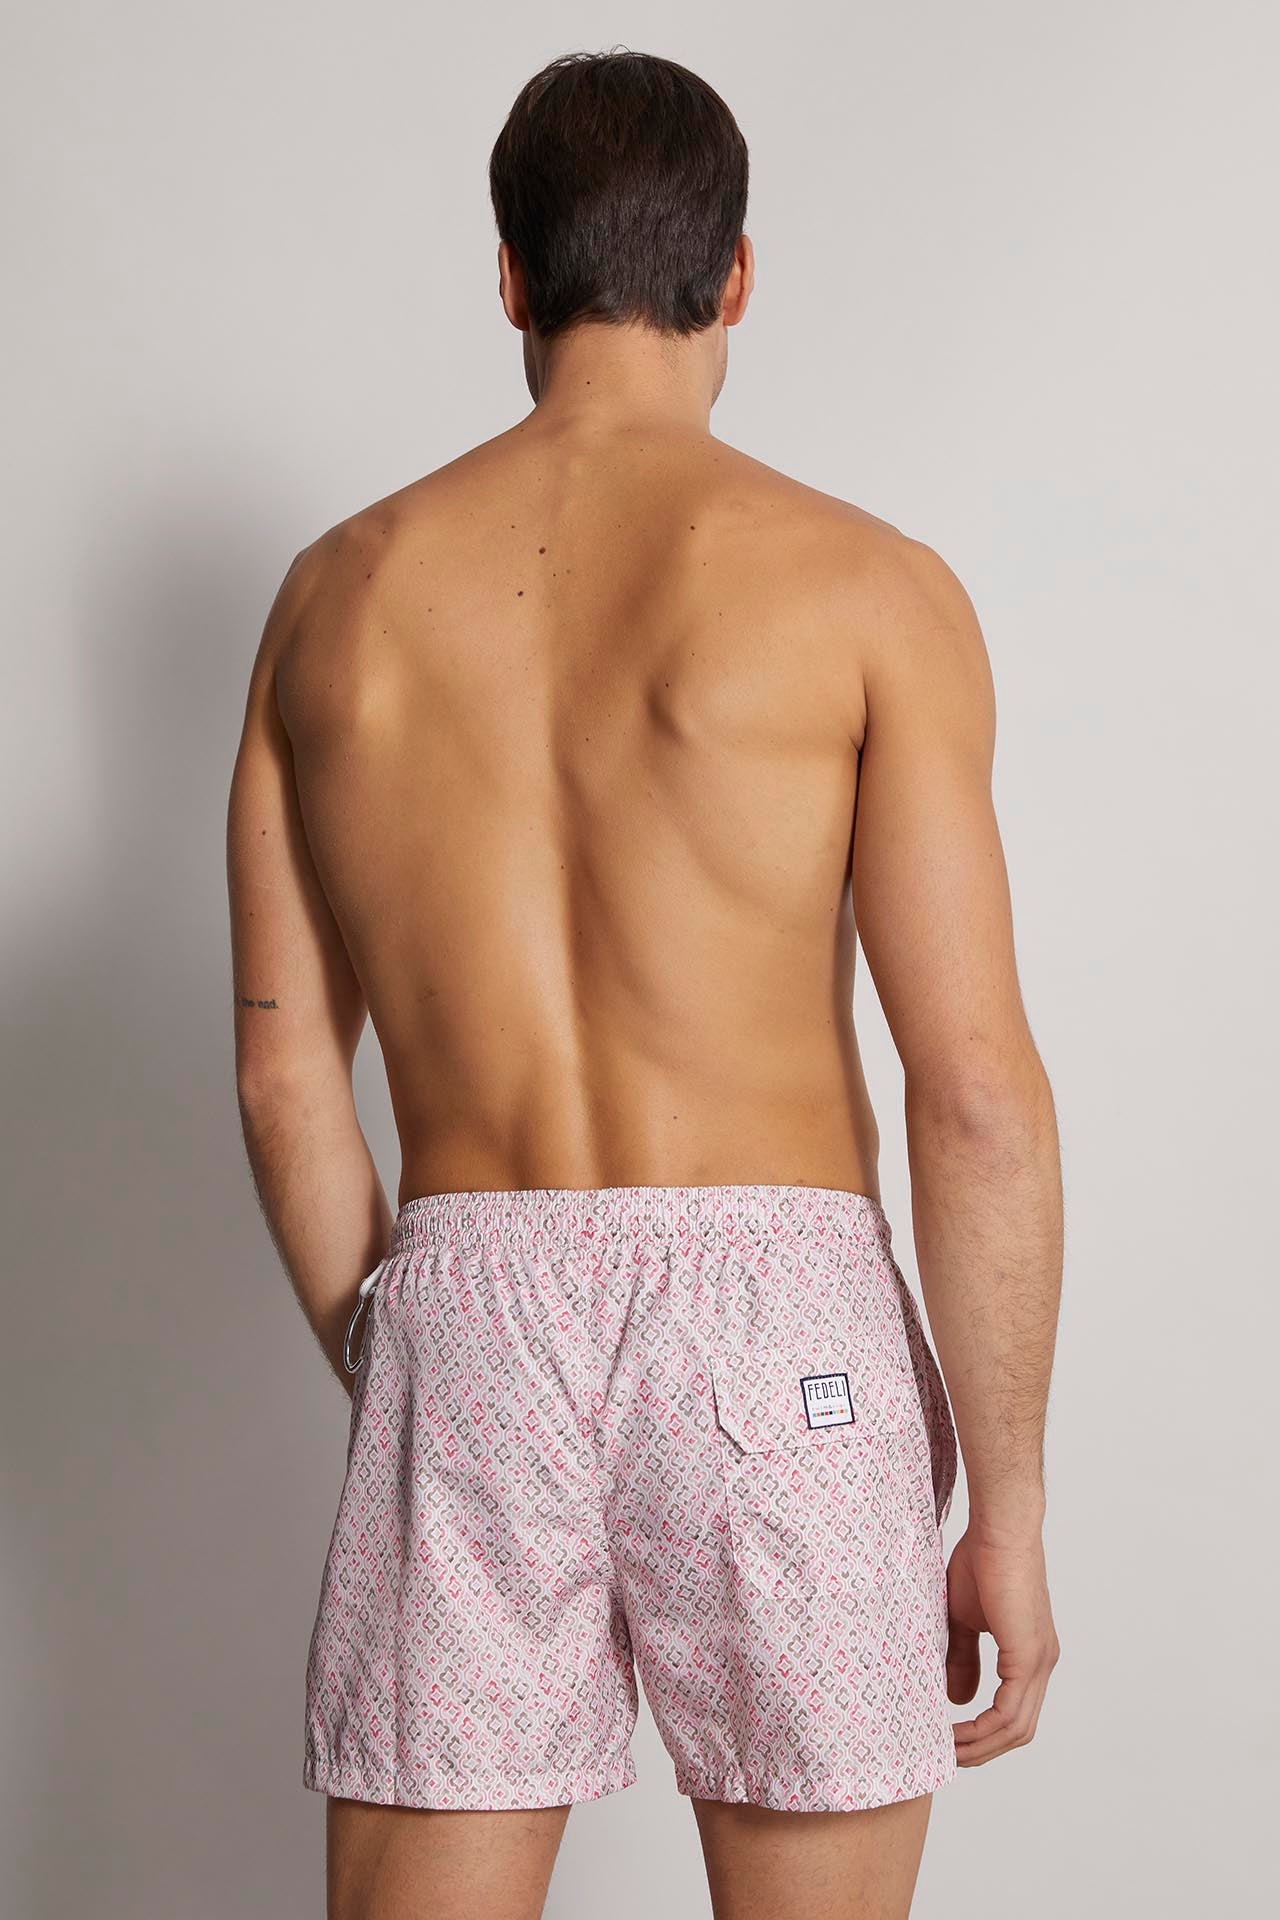 Madeira - the sustainable swim trunk - spring pattern